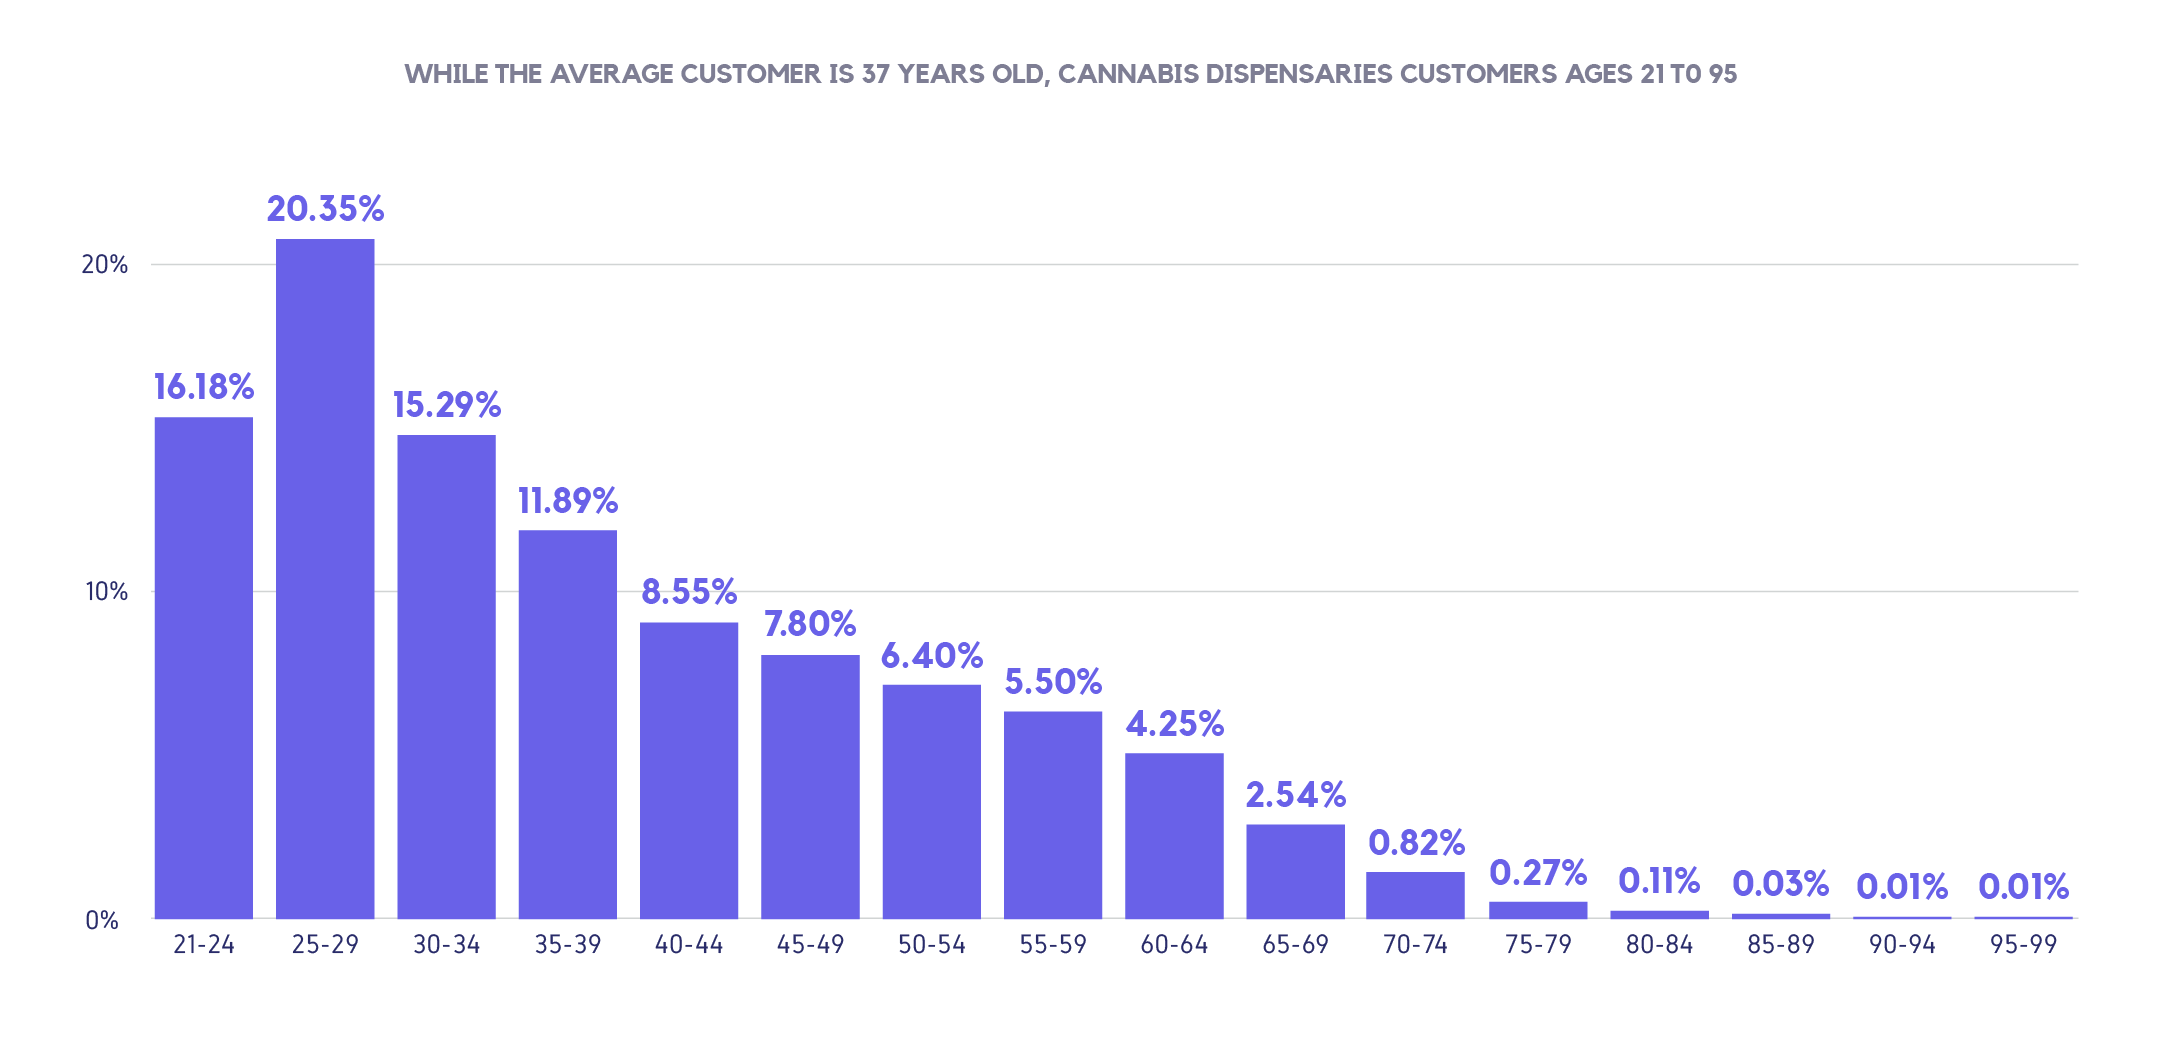 Cannabis purchases by age group